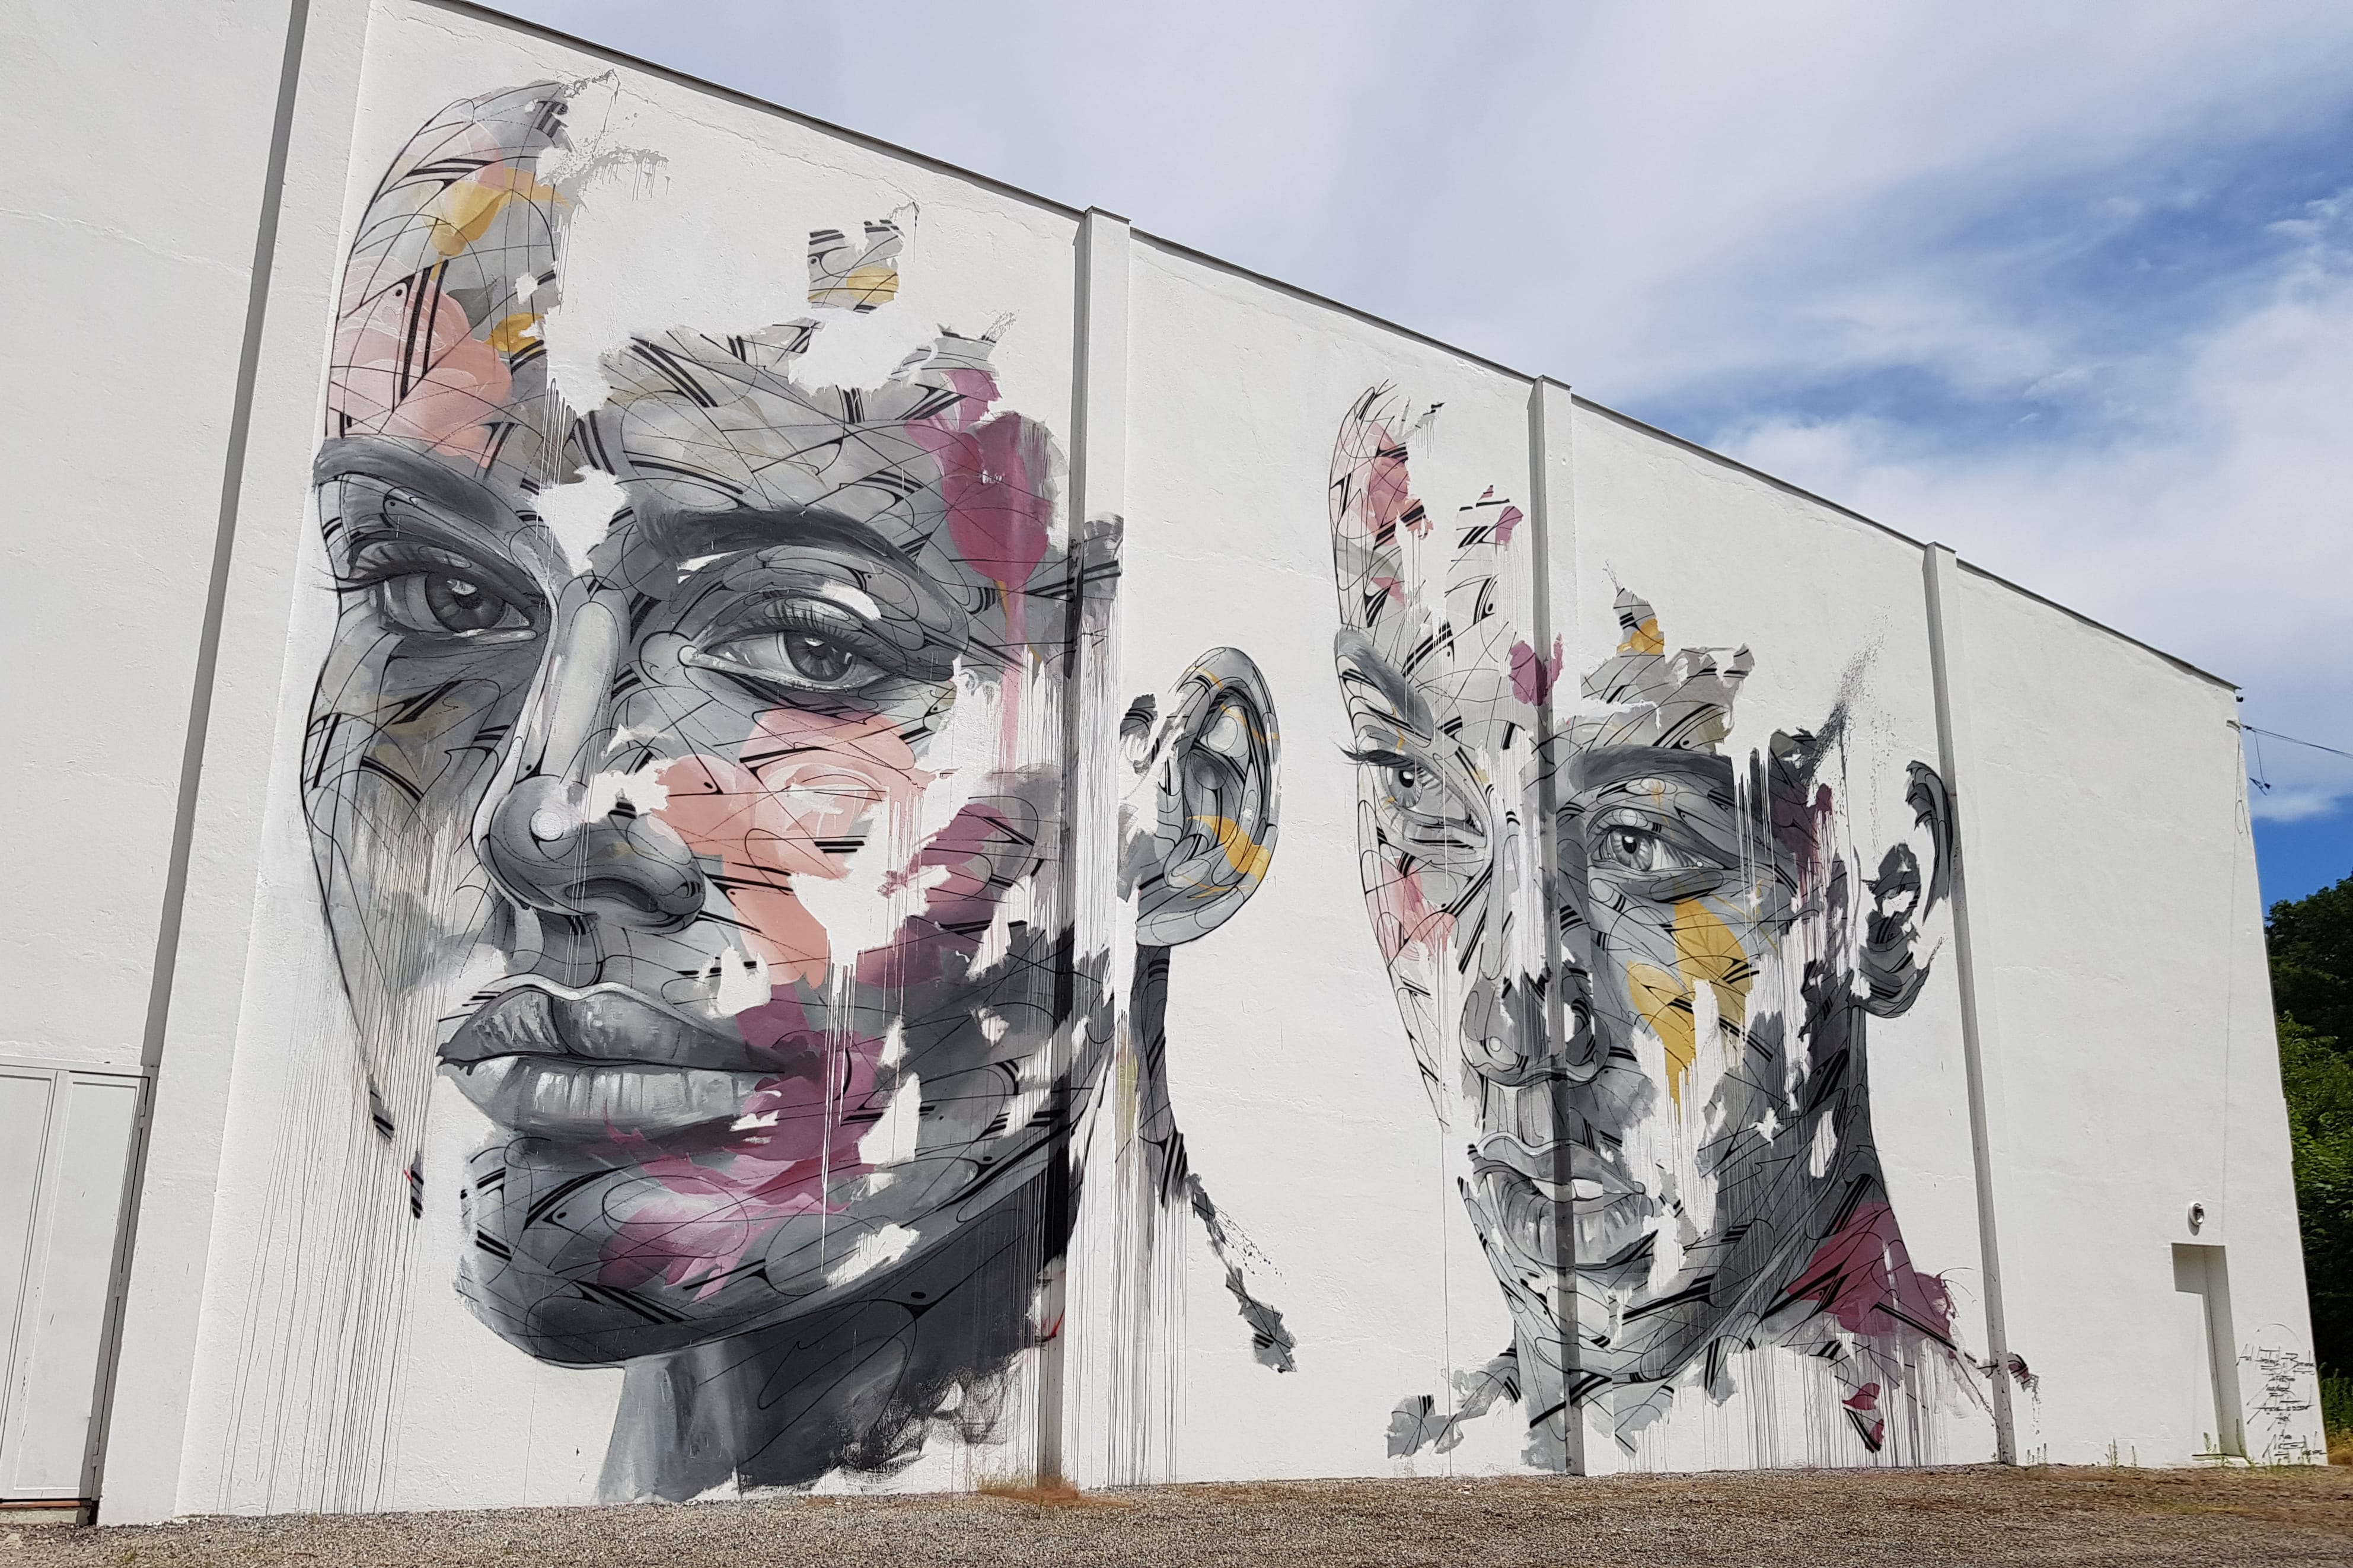 Graffiti 6256  by the artist Hopare captured by Mephisroth in Decazeville France